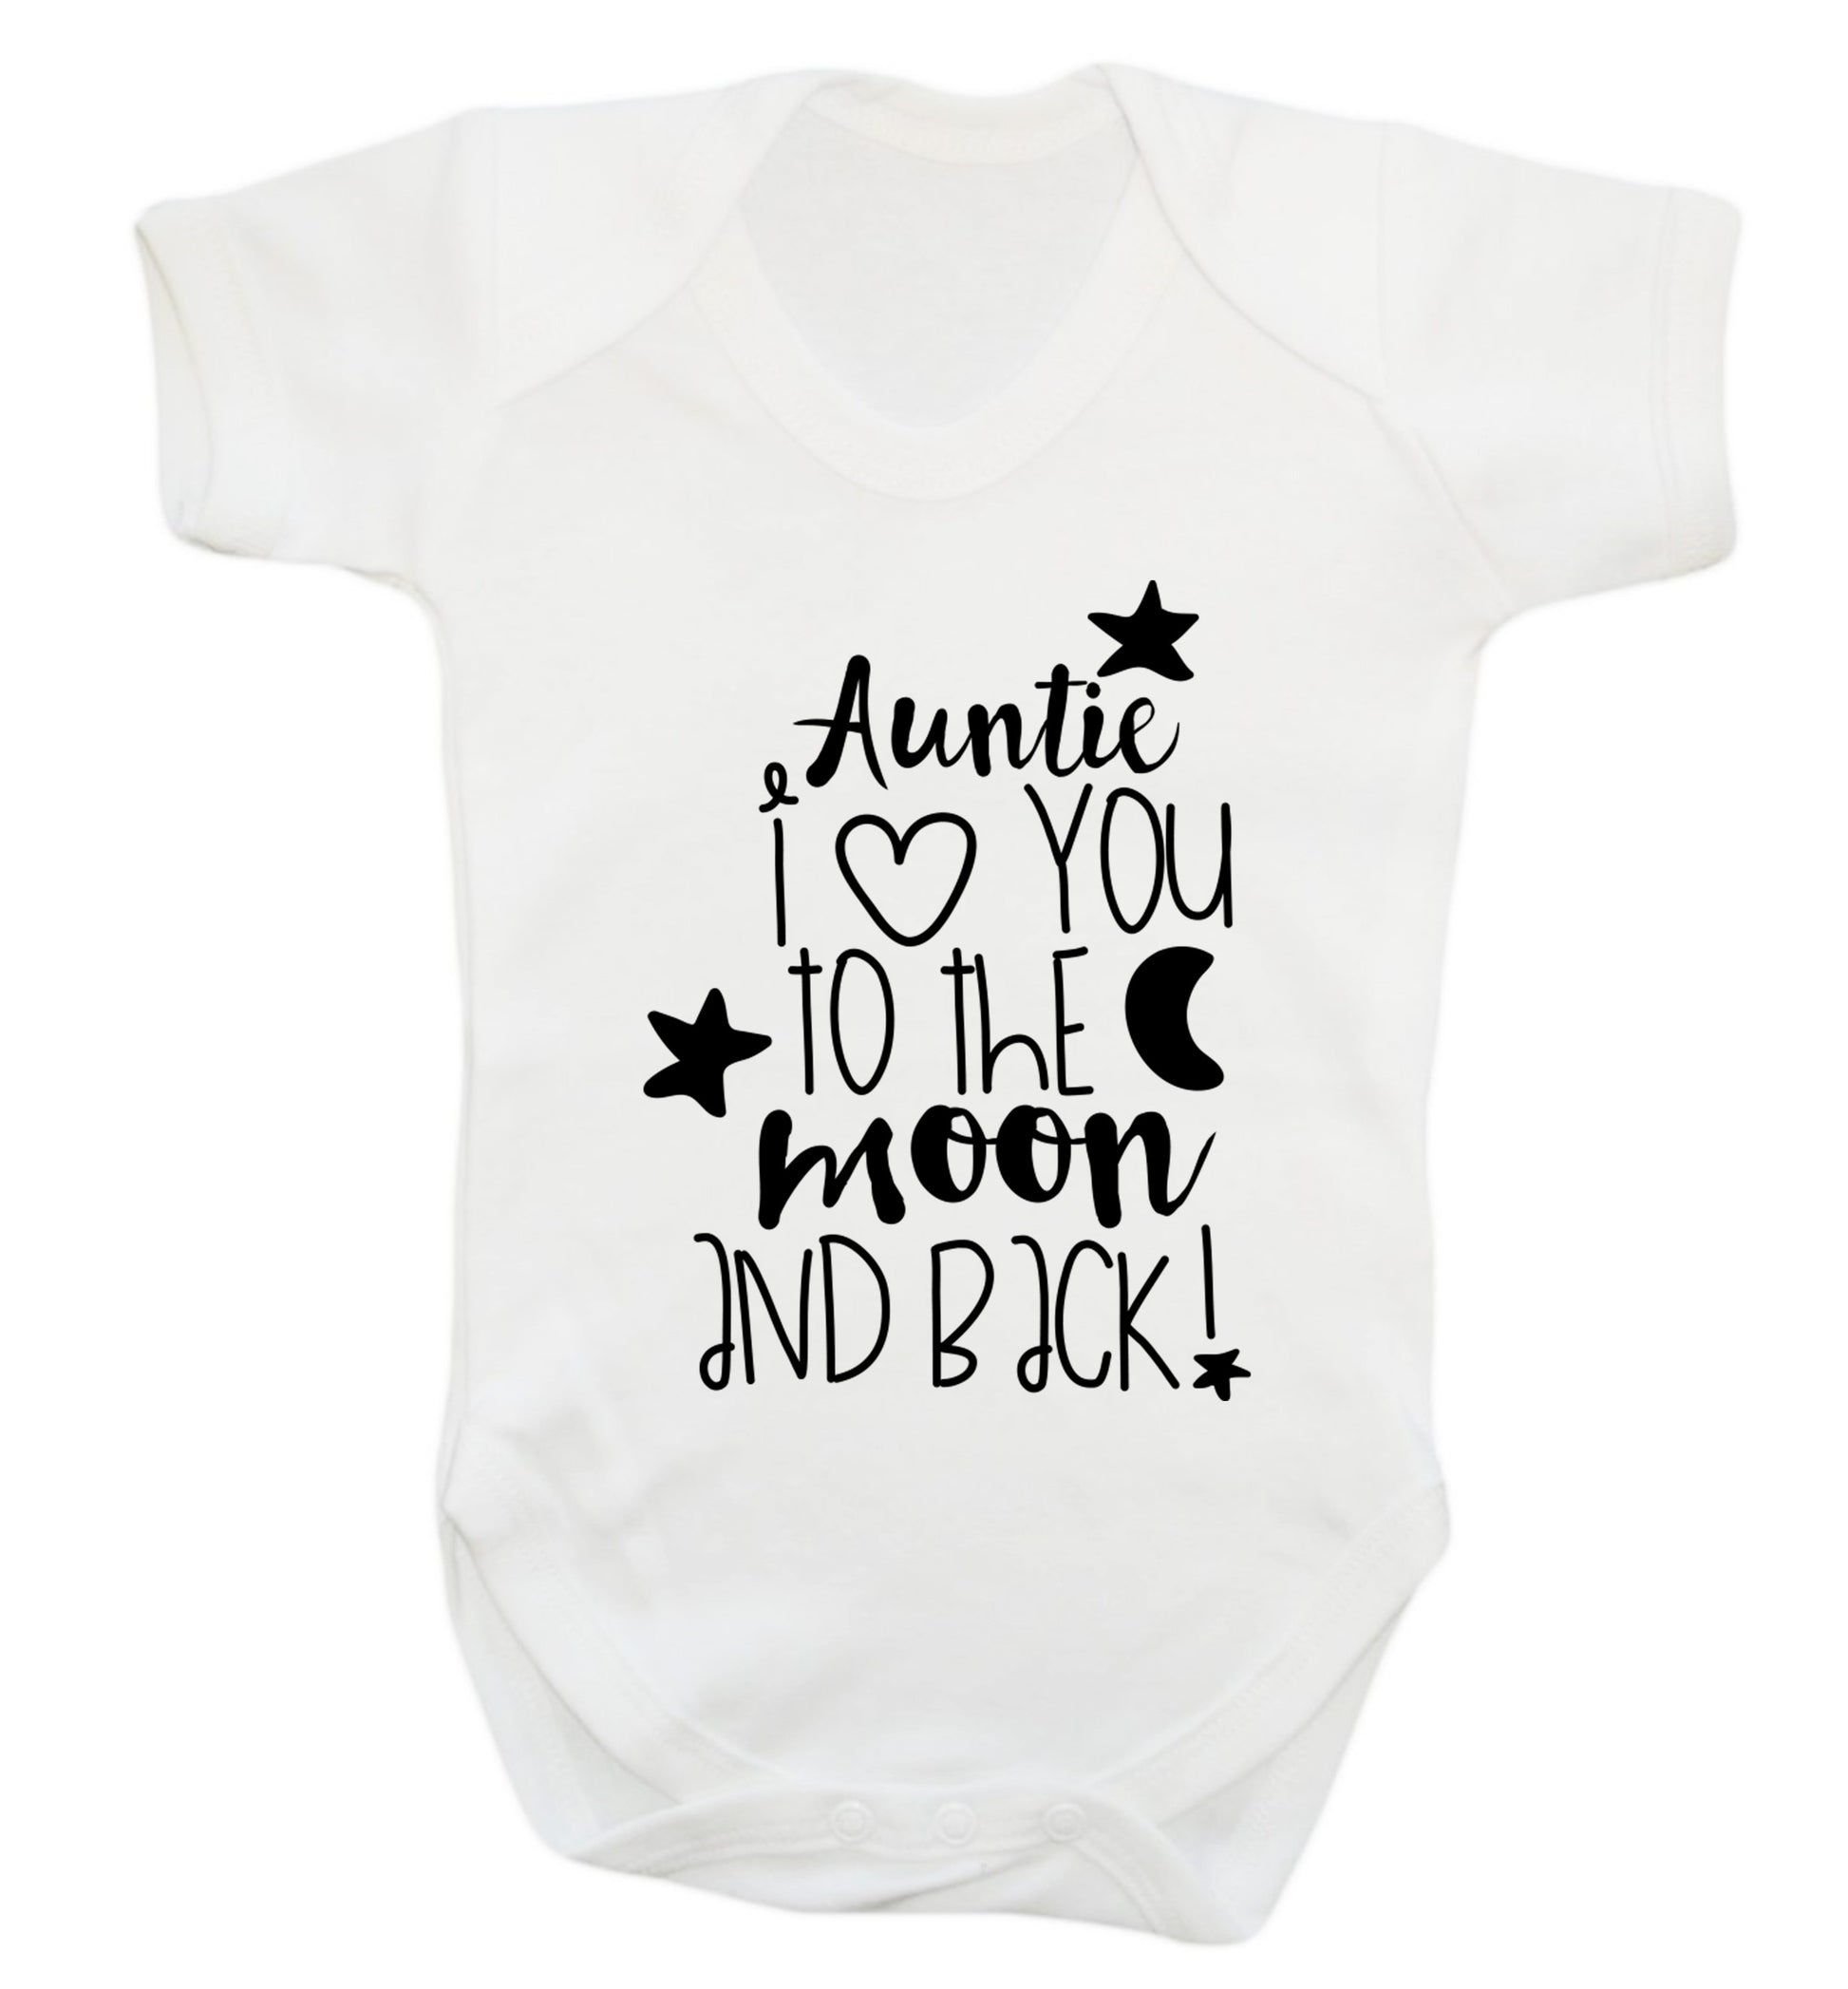 Auntie I love you to the moon and back Baby Vest white 18-24 months